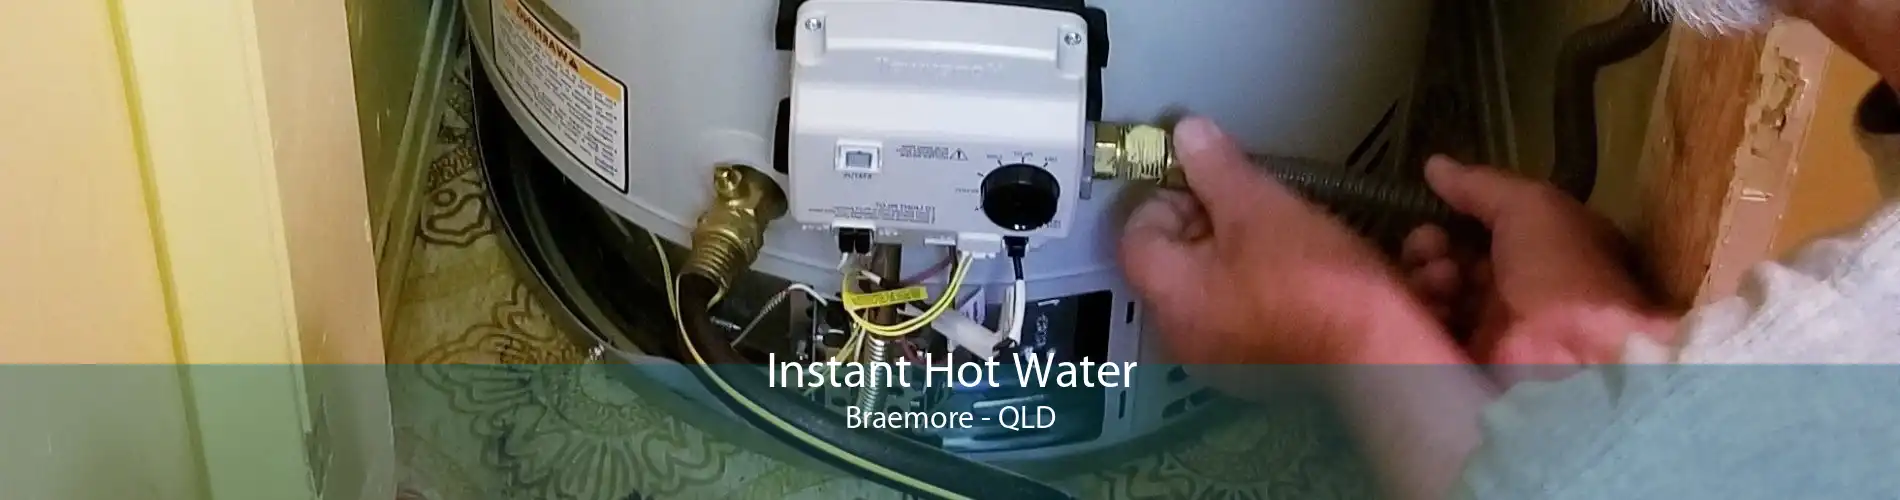 Instant Hot Water Braemore - QLD